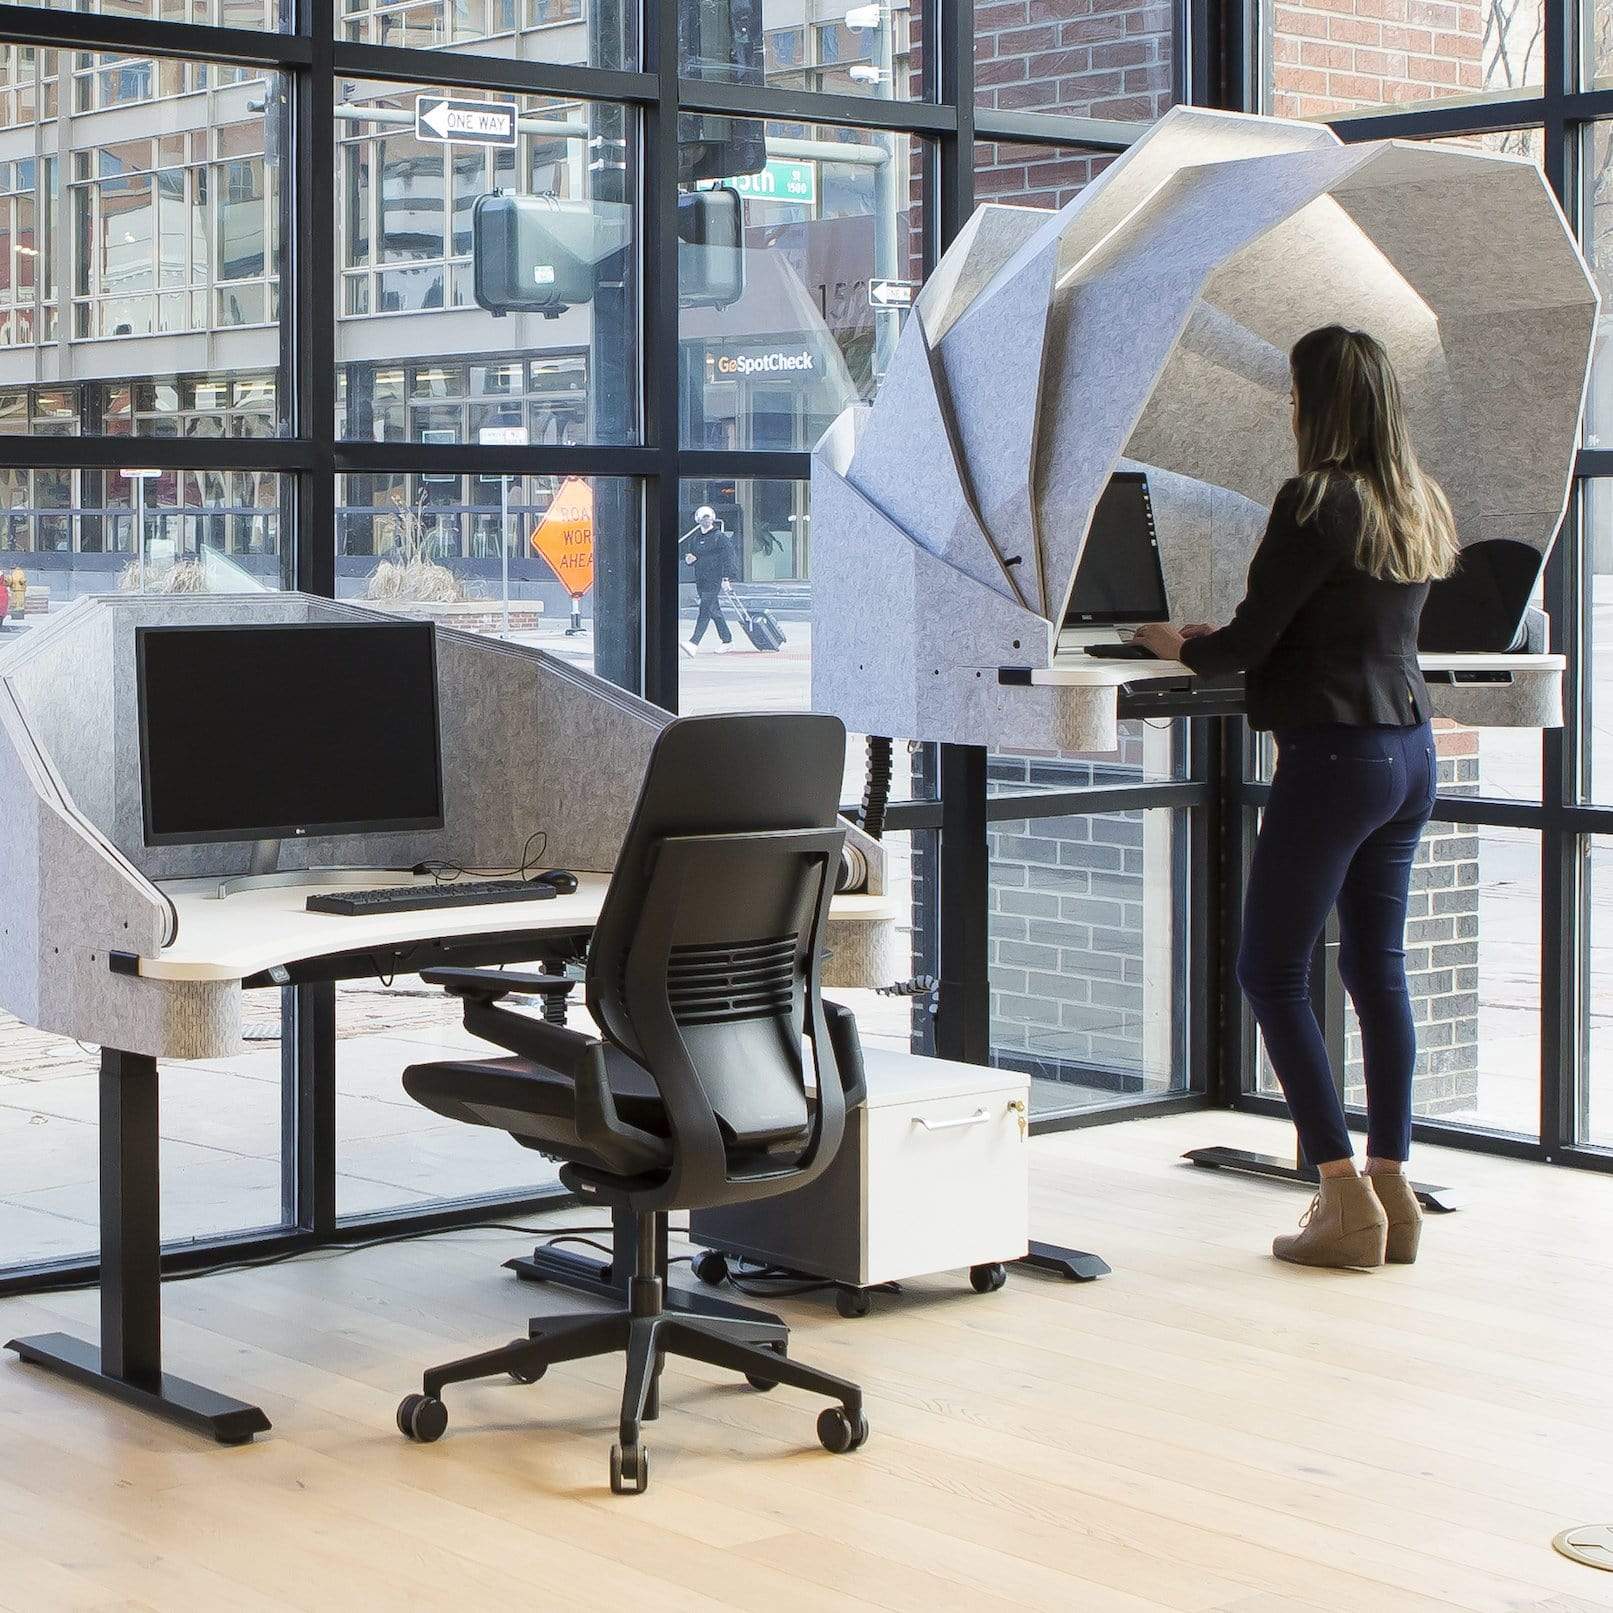 2 MojoDome units shown side by side with electric standing desk sound absorbing panels up and down and woman standing typing on computer on the right hand side